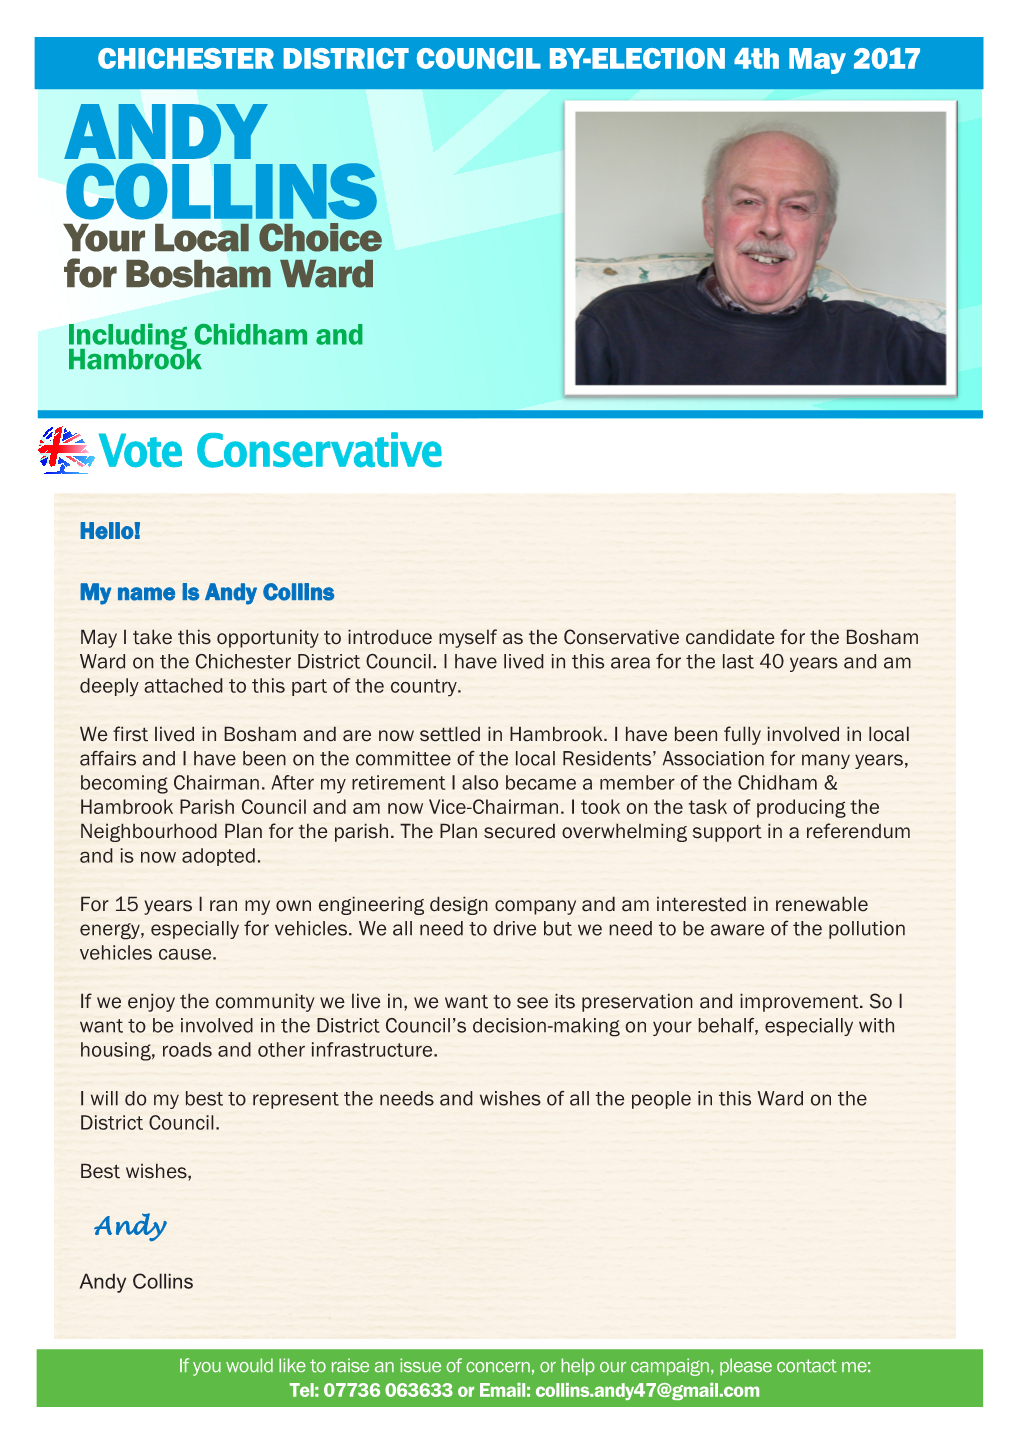 ANDY COLLINS Your Local Choice for Bosham Ward